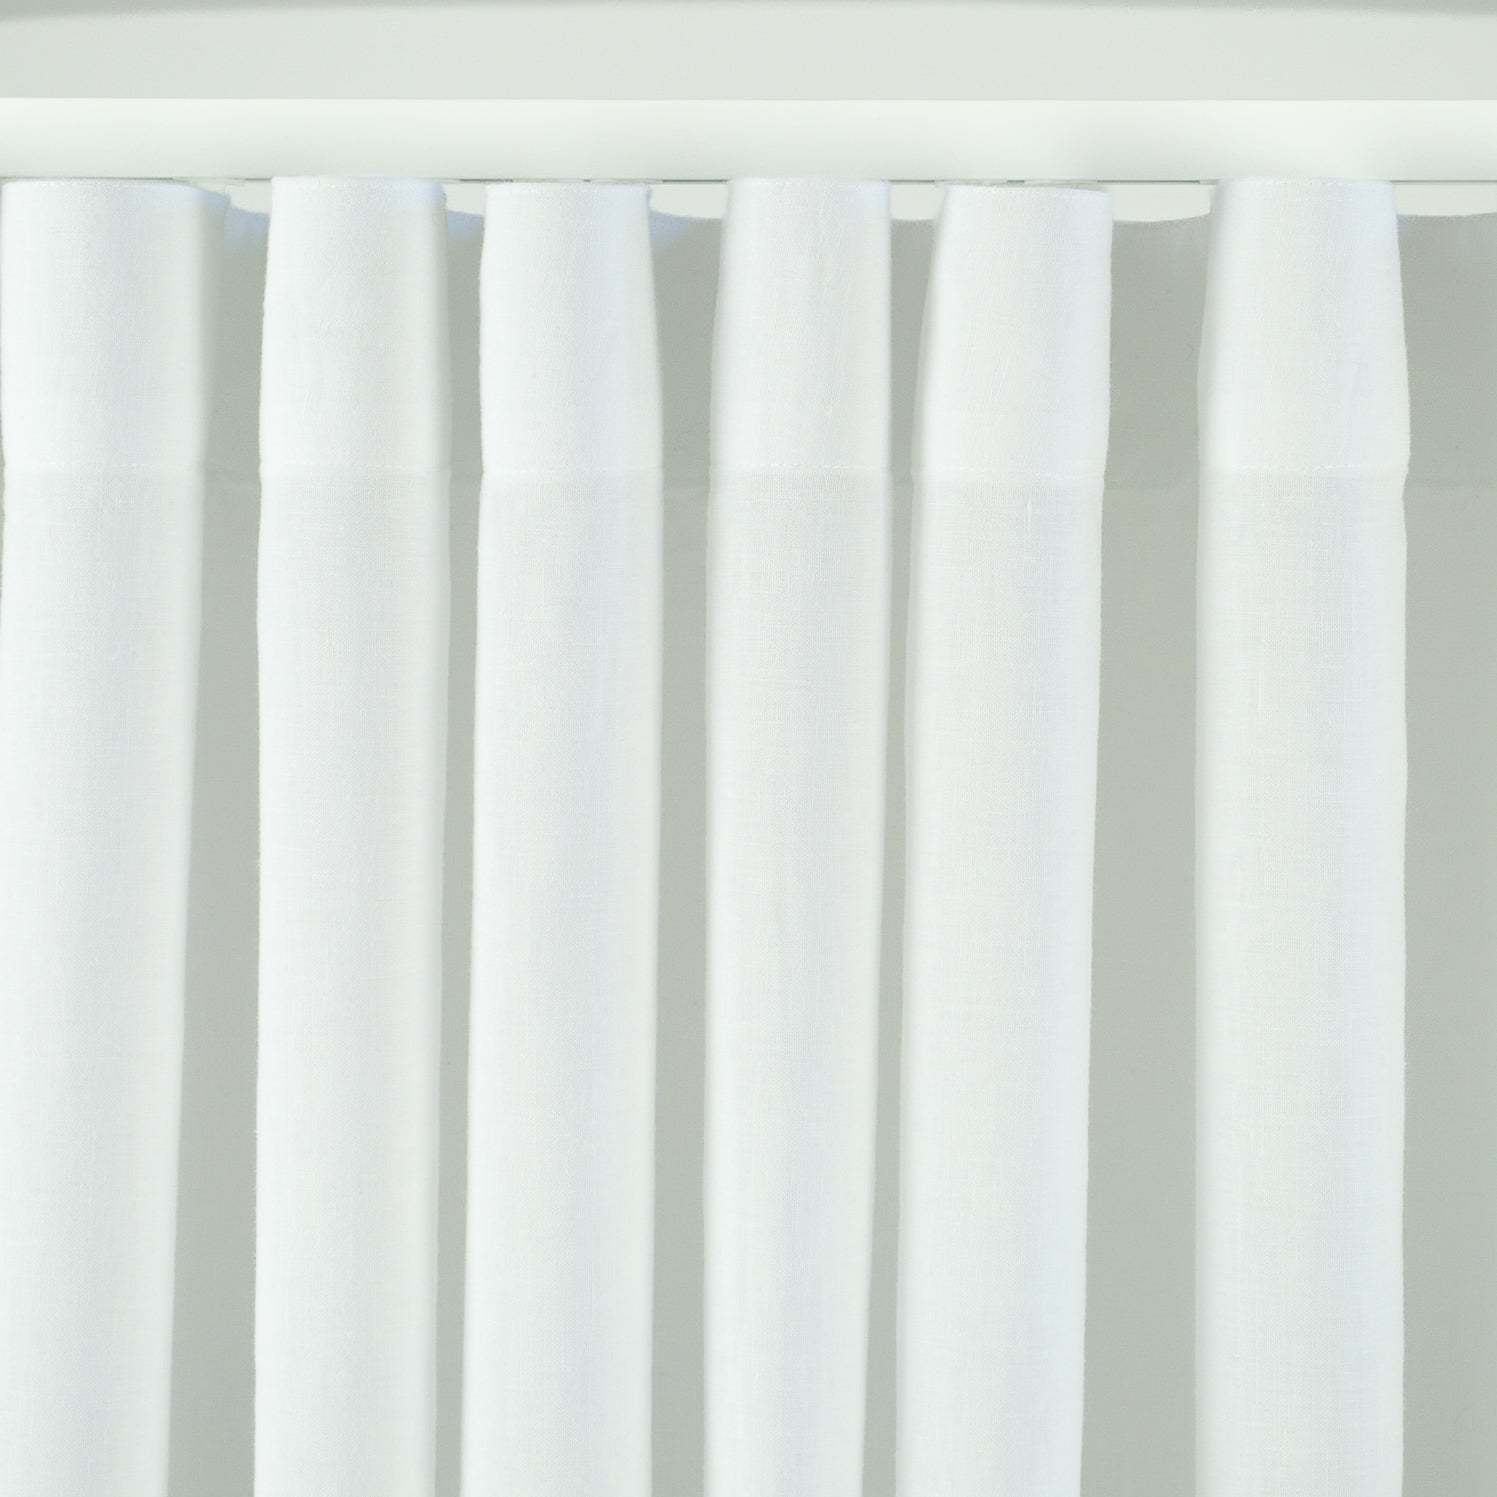 Unlined Curtain in White 